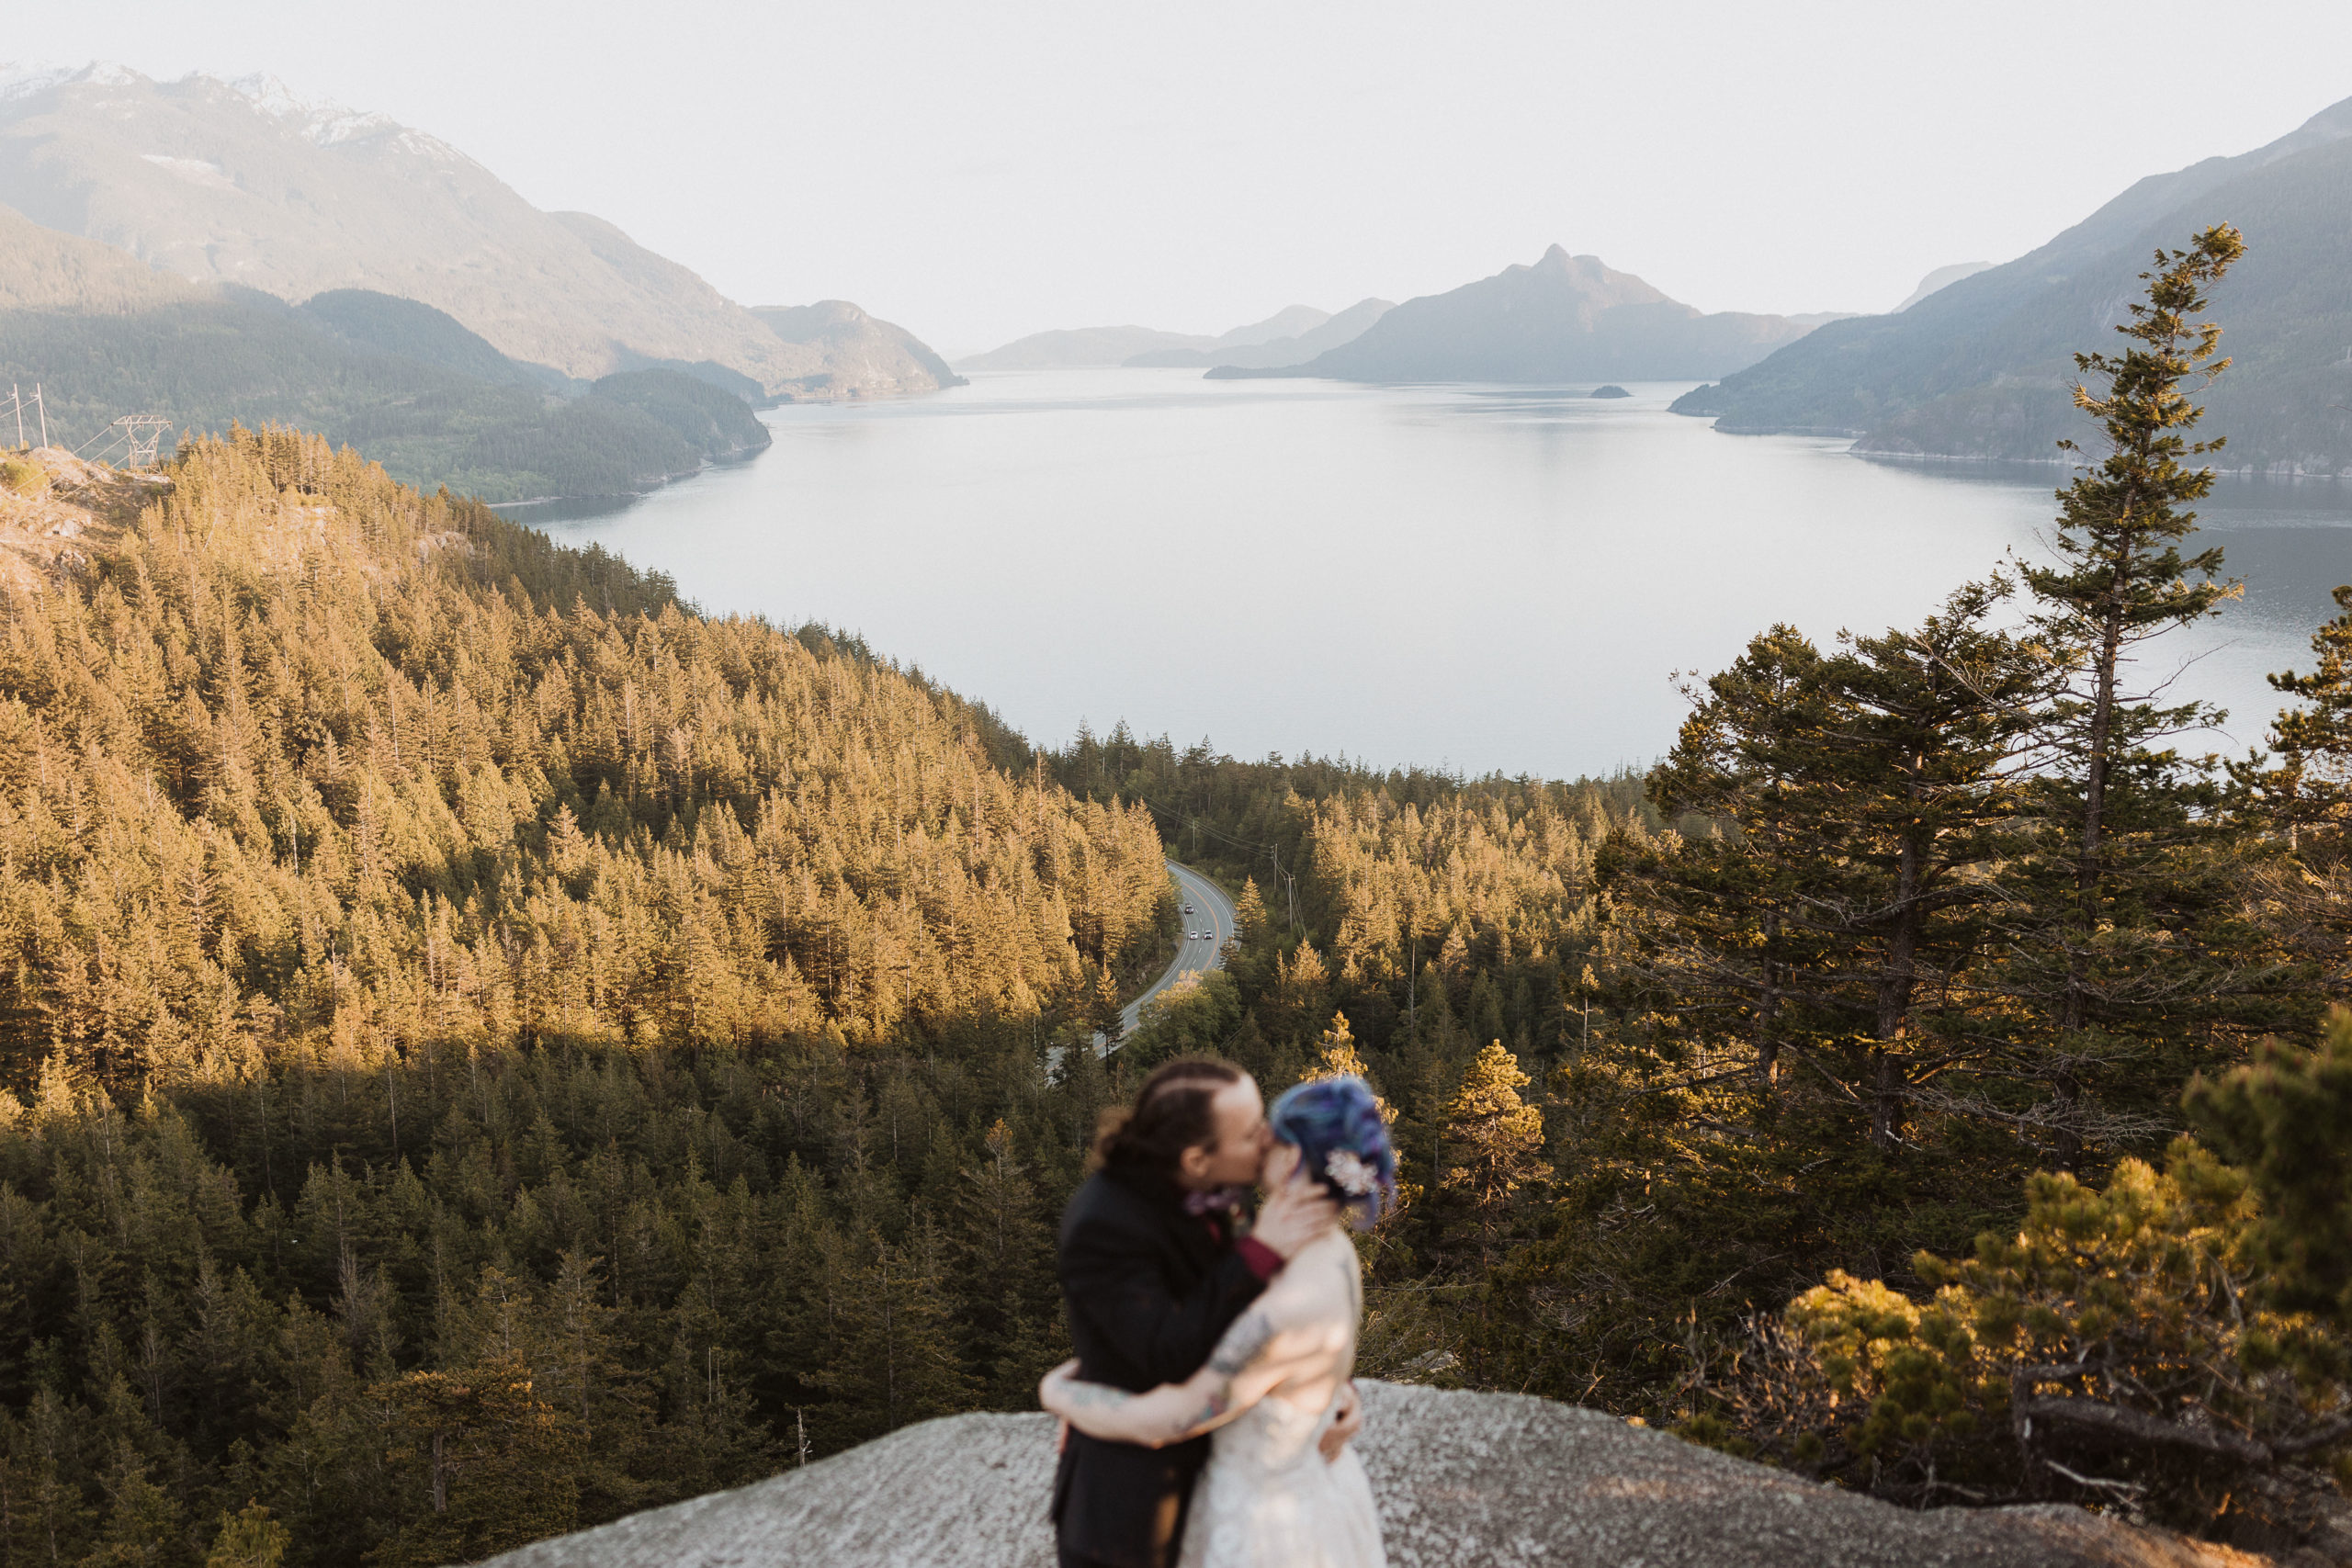 The Best Ideas for How to Make an Elopement Special & Unique